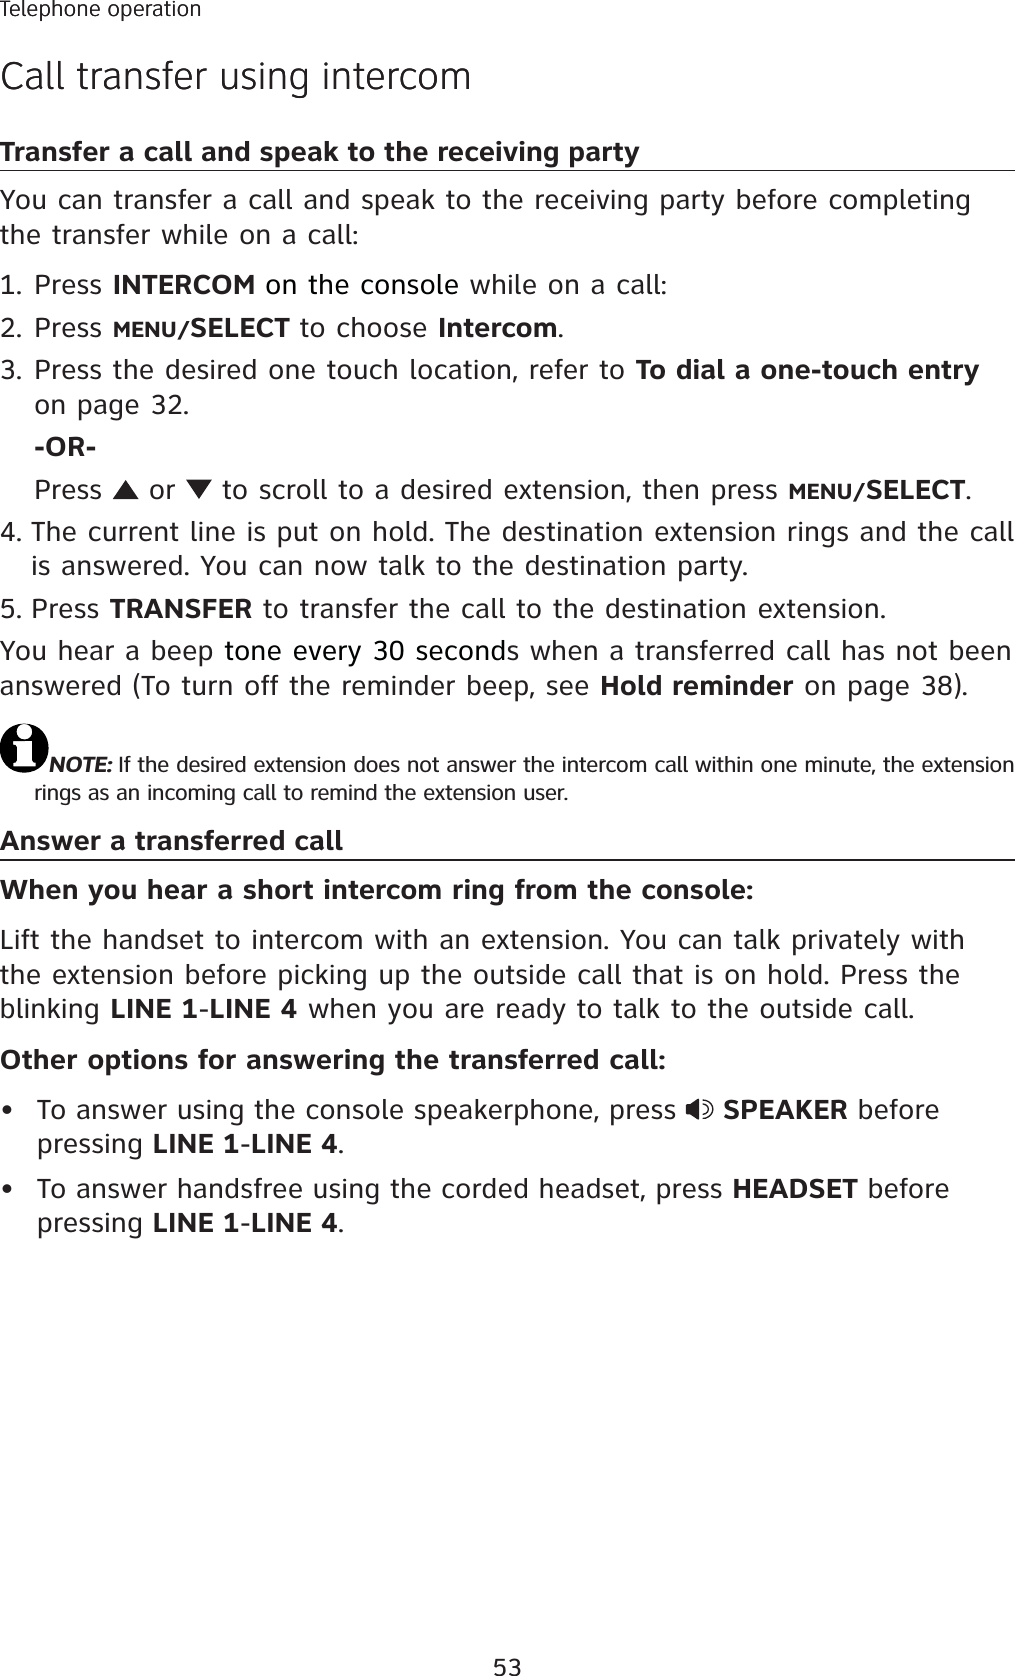 53Telephone operationCall transfer using intercomTransfer a call and speak to the receiving partyYou can transfer a call and speak to the receiving party before completing the transfer while on a call:Press INTERCOM on the console while on a call:Press MENU/SELECT to choose Intercom.Press the desired one touch location, refer to To dial a one-touch entryon page 32.-OR-Press   or   to scroll to a desired extension, then press MENU/SELECT.The current line is put on hold. The destination extension rings and the call is answered. You can now talk to the destination party. Press TRANSFER to transfer the call to the destination extension.You hear a beep tone every 30 seconds when a transferred call has not been answered (To turn off the reminder beep, see Hold reminder on page 38).NOTE: If the desired extension does not answer the intercom call within one minute, the extension rings as an incoming call to remind the extension user. Answer a transferred callWhen you hear a short intercom ring from the console:Lift the handset to intercom with an extension. You can talk privately with the extension before picking up the outside call that is on hold. Press the blinking LINE 1-LINE 4 when you are ready to talk to the outside call. Other options for answering the transferred call:To answer using the console speakerphone, press  SPEAKER before pressing LINE 1-LINE 4.To answer handsfree using the corded headset, press HEADSET before pressing LINE 1-LINE 4.1.2.3.4.5.••Telephone operationCall transfer using intercom